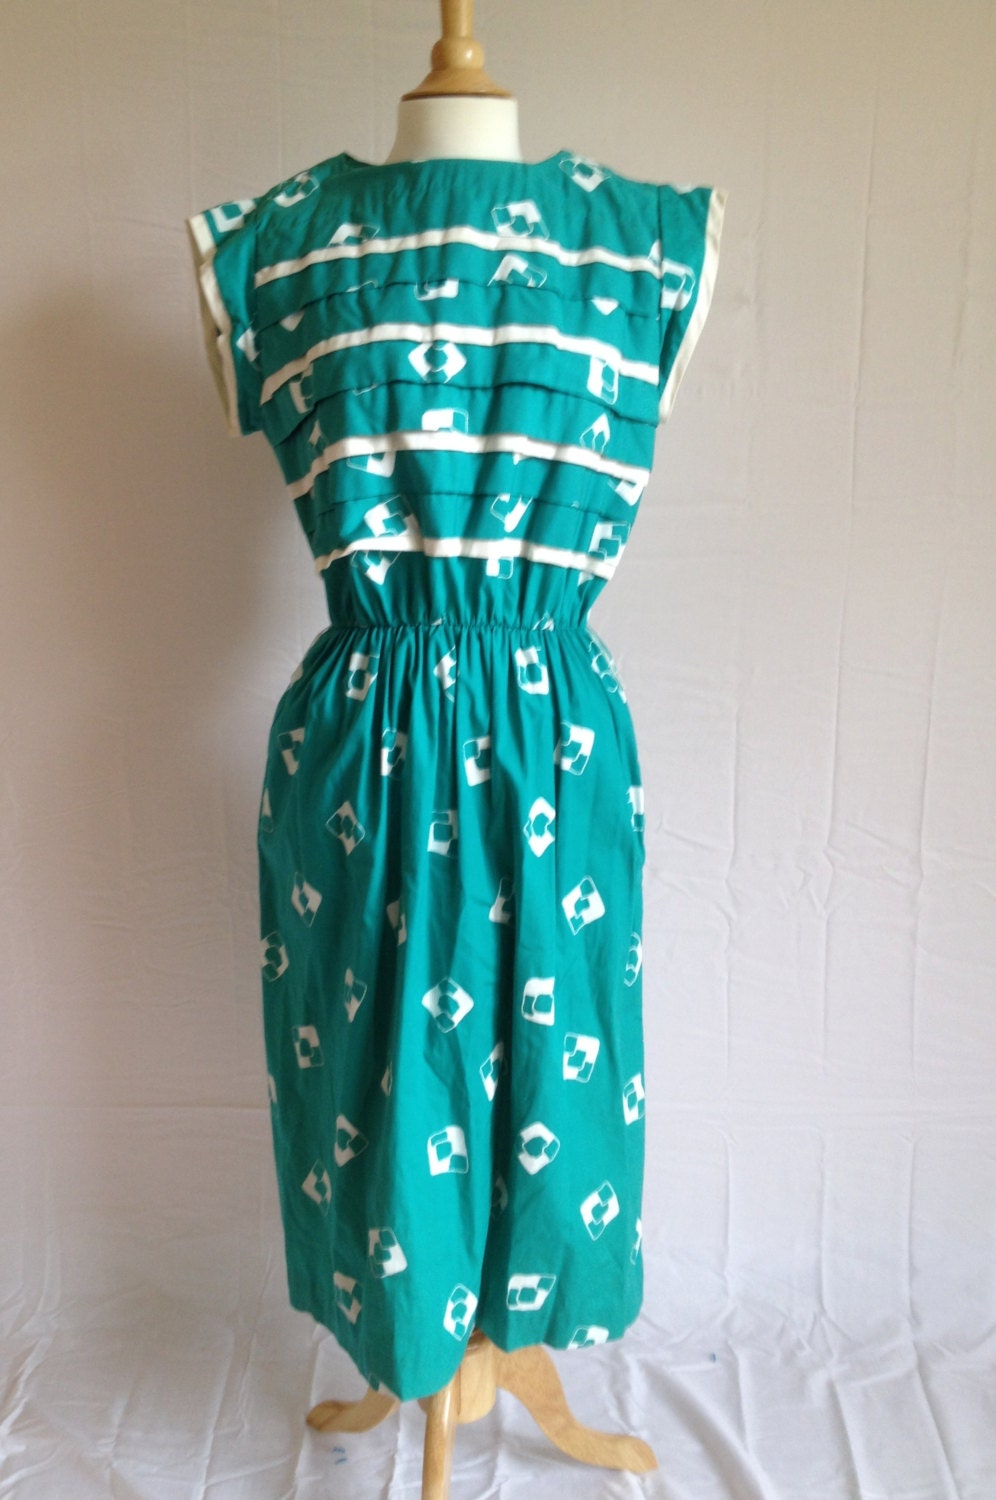 Vintage 1960s Teal and White Dress Size 14 by VintageOutoftheAttic